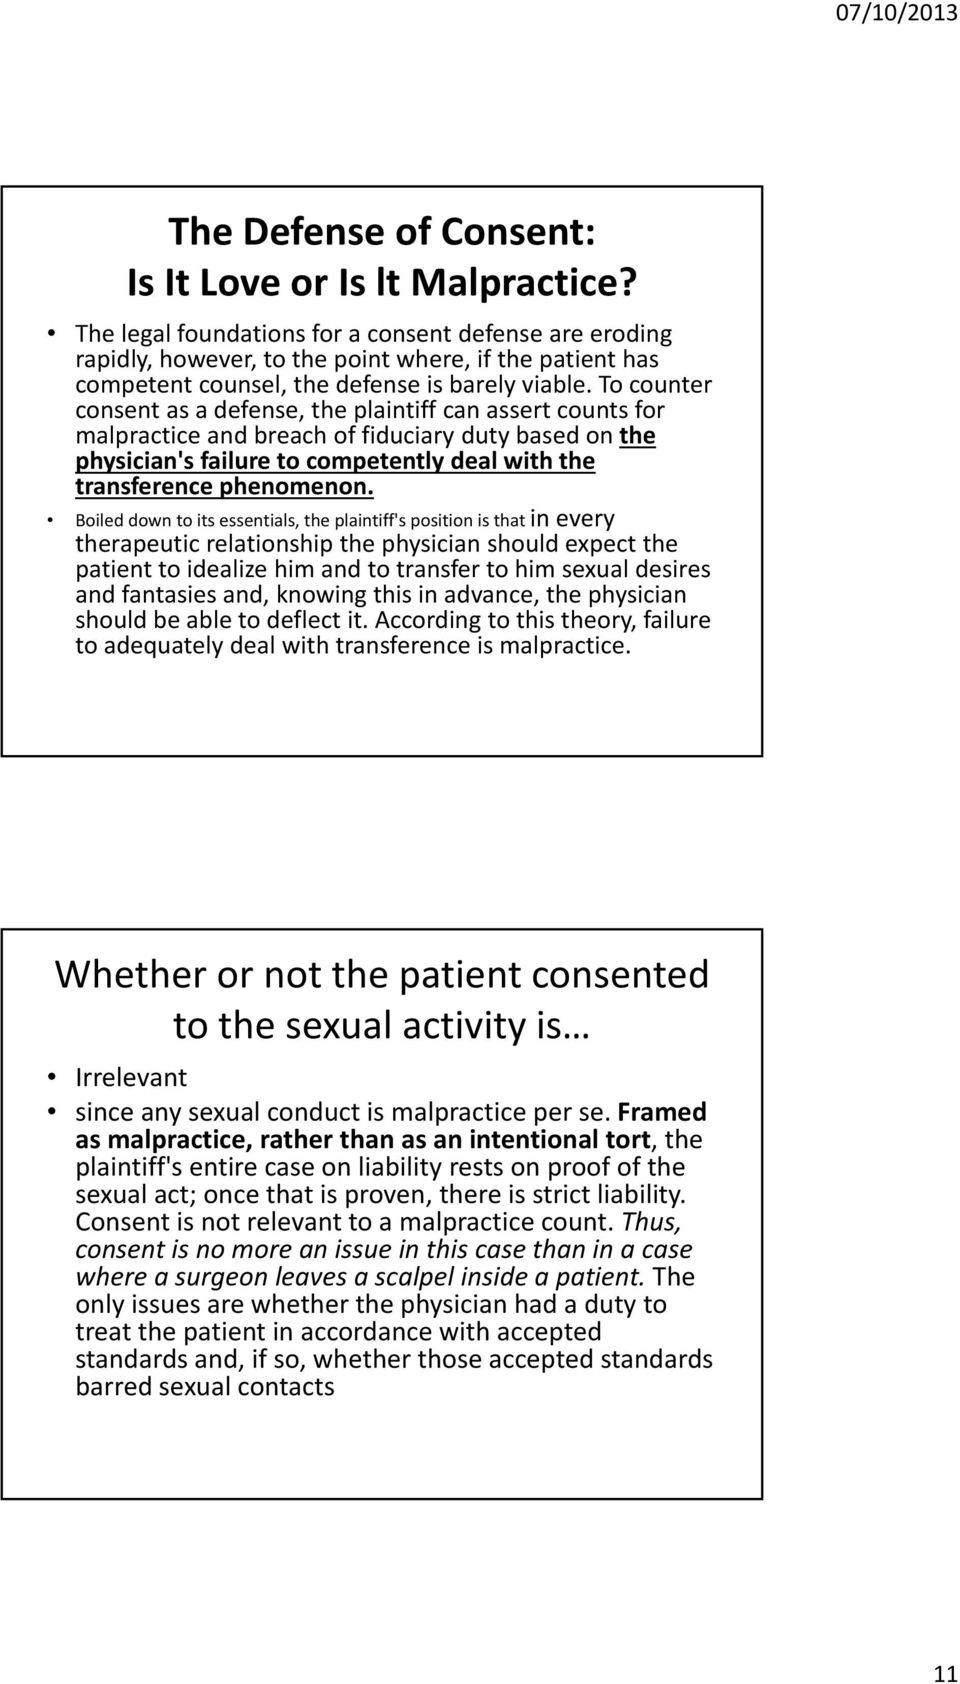 To counter consent as a defense, the plaintiff can assert counts for malpractice and breach of fiduciary duty based on the physician's failure to competently deal with the transference phenomenon.